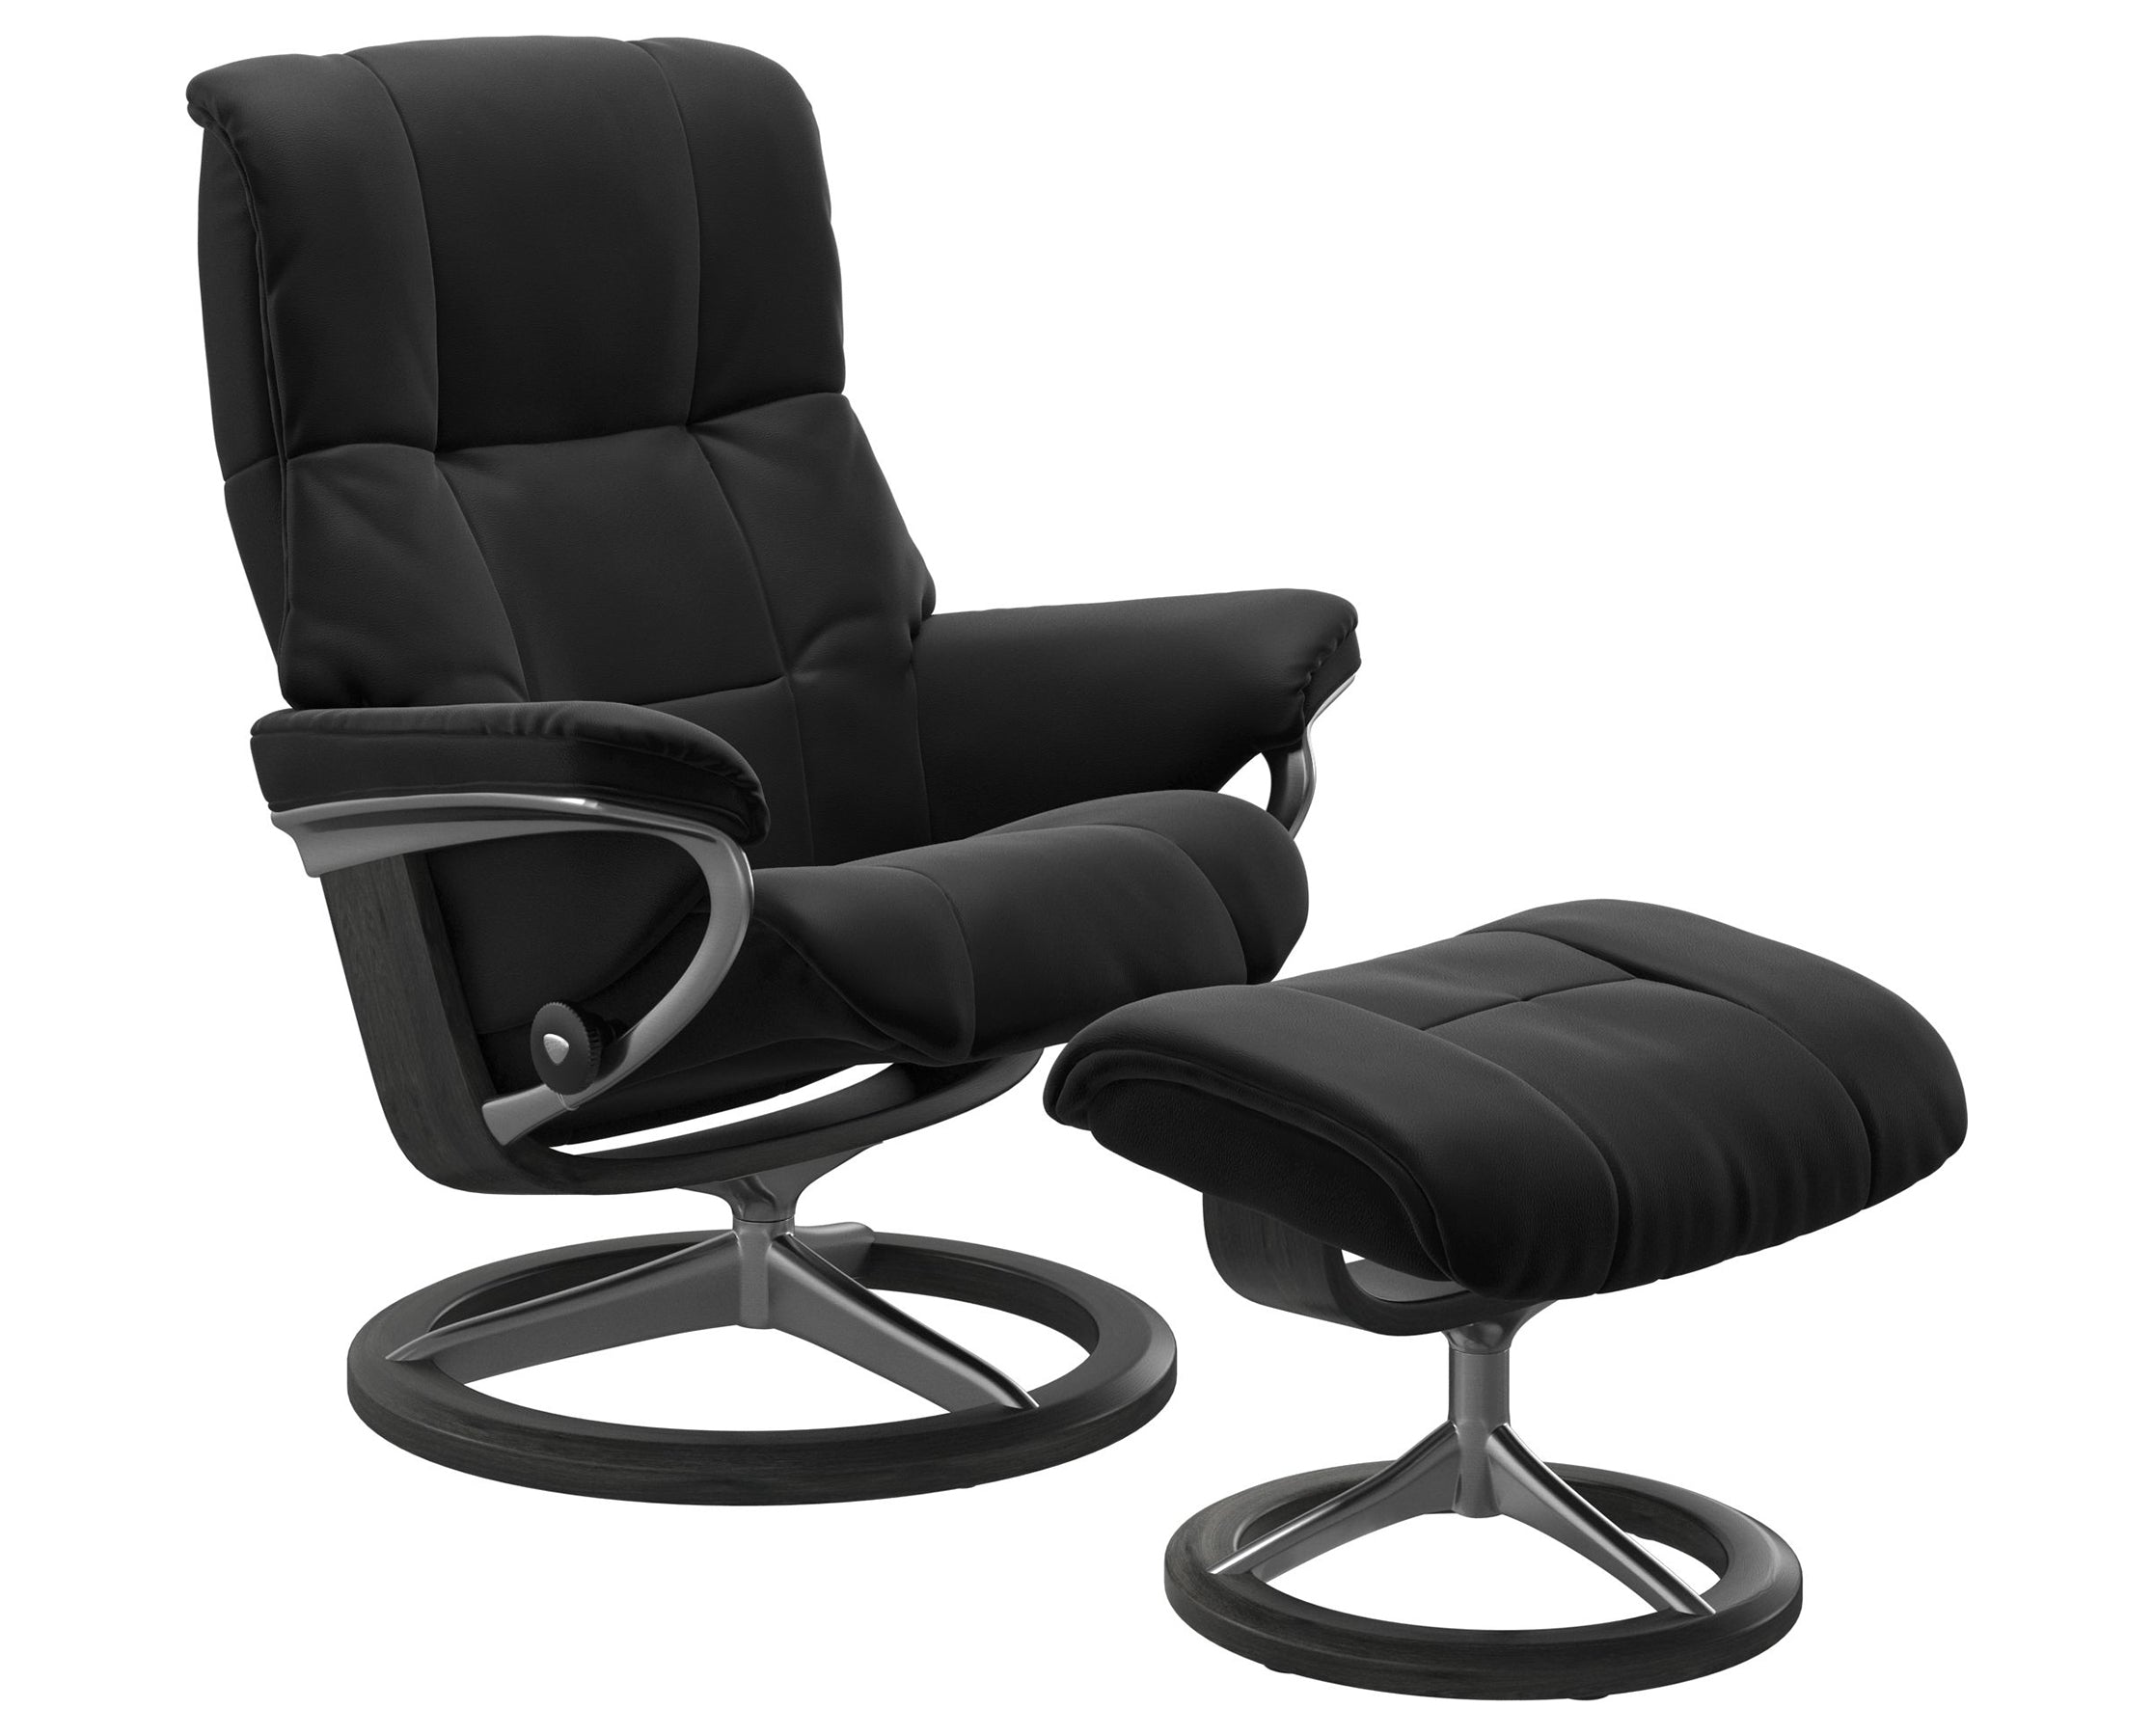 Paloma Leather Black S/M/L and Grey Base | Stressless Mayfair Signature Recliner | Valley Ridge Furniture